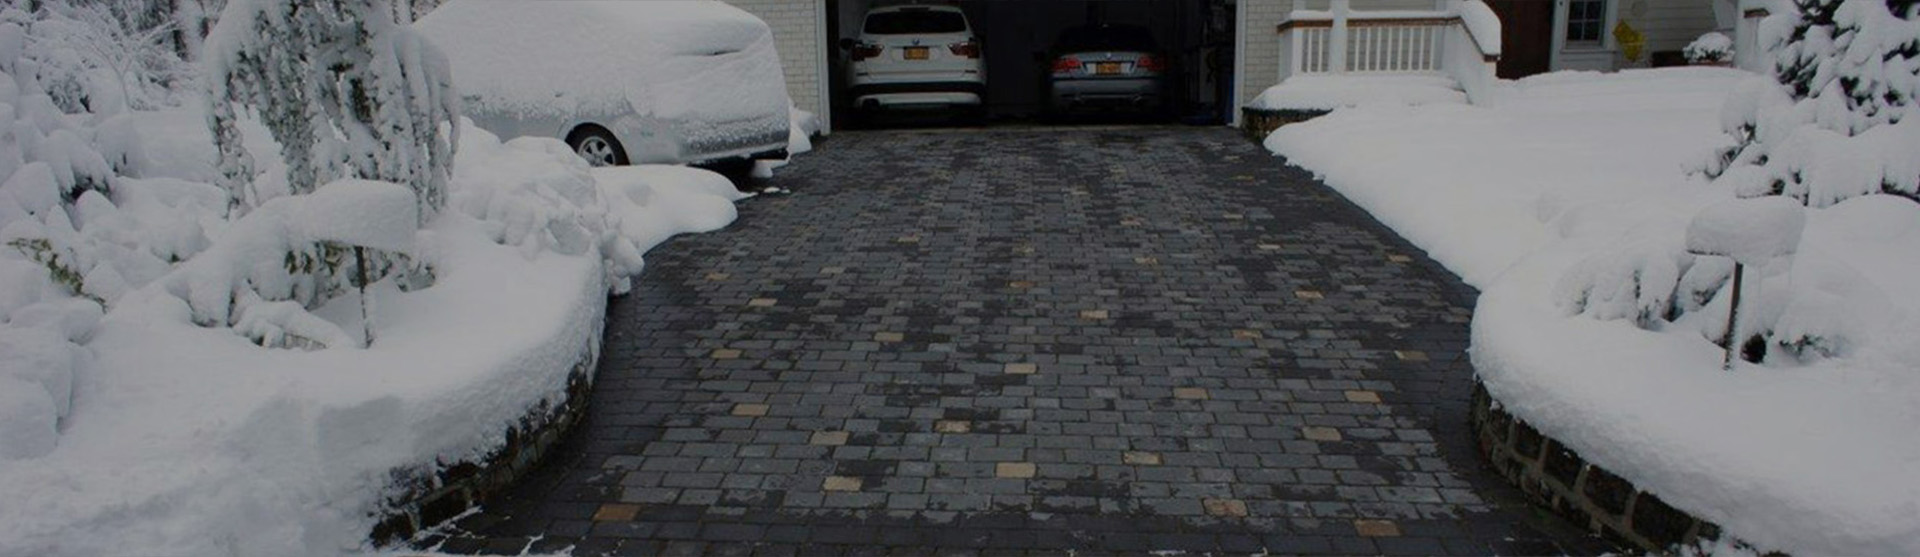 Radiant heated driveway after a snowstorm